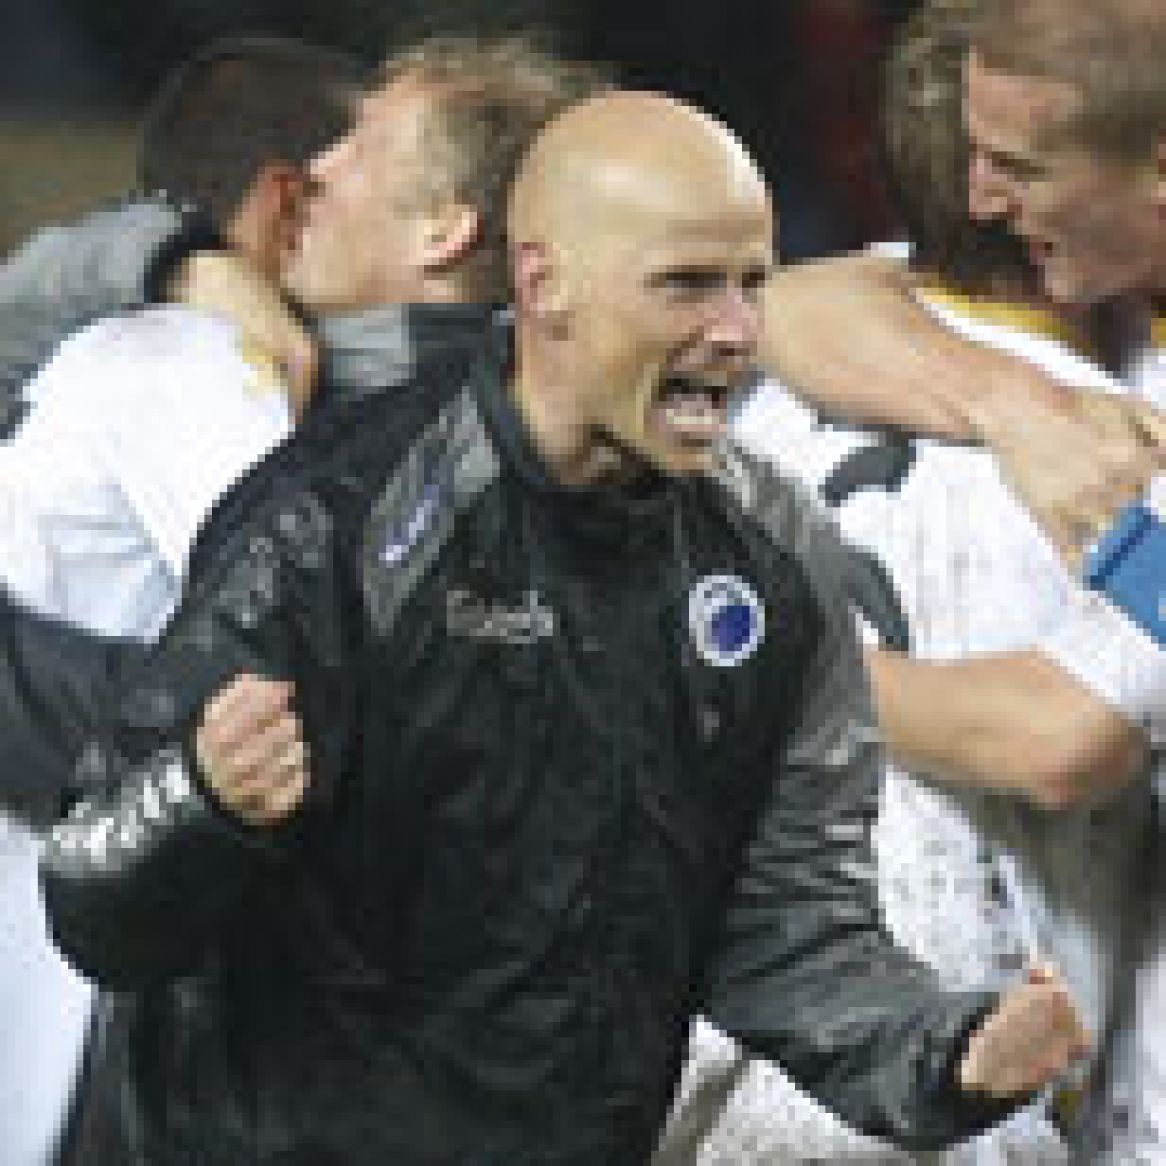 Ståle Solbakken: - Yes, we have a chance